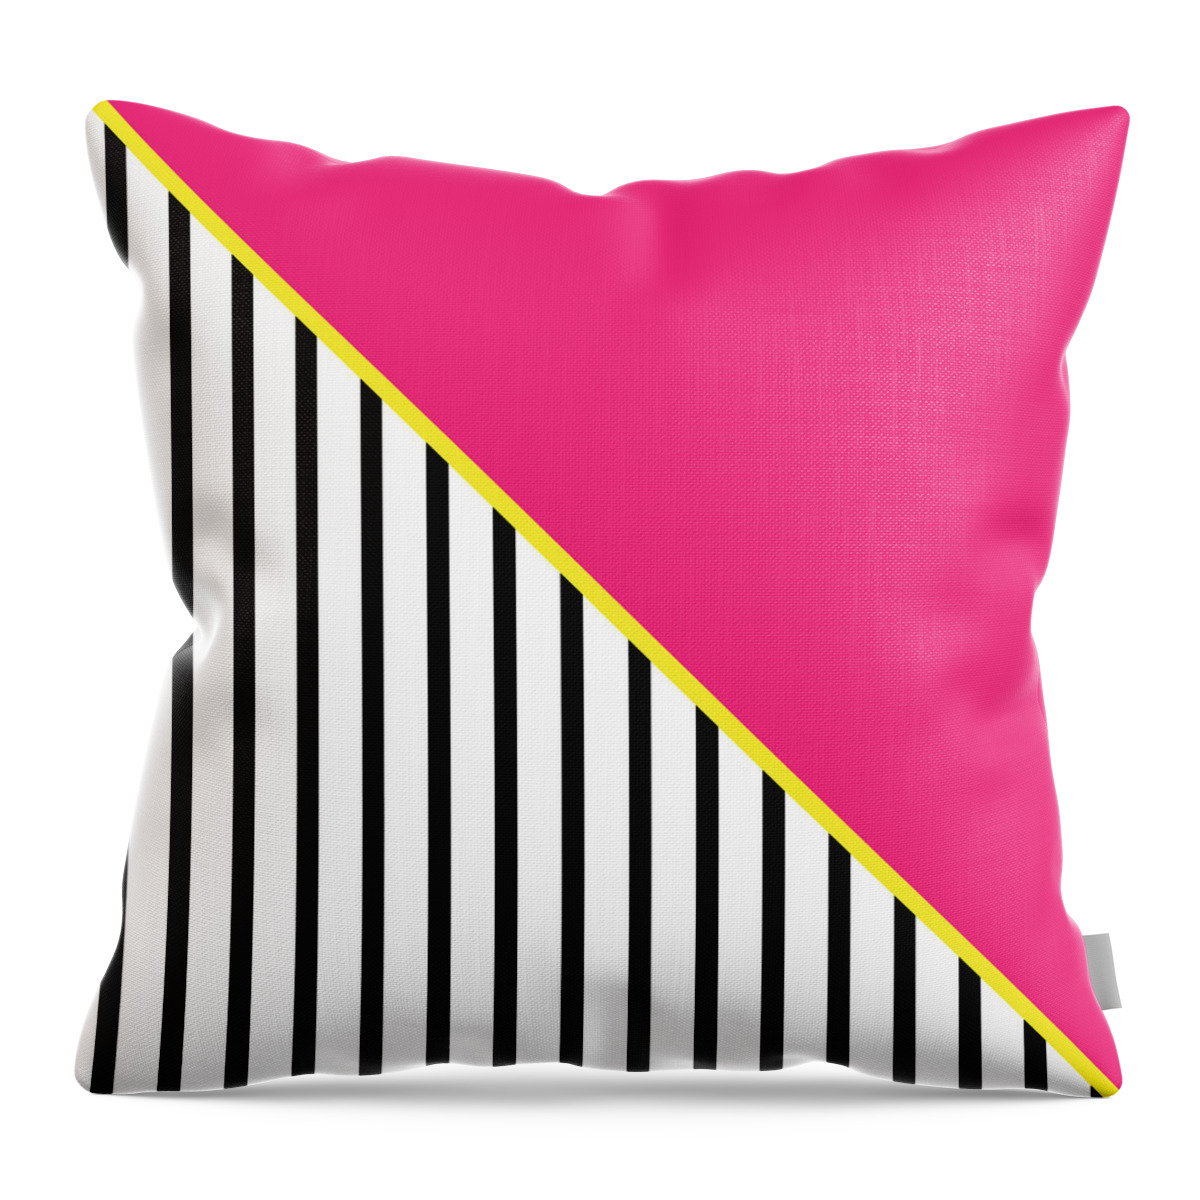 Pink Throw Pillow featuring the digital art Yellow Pink And Black Geometric 2 by Linda Woods